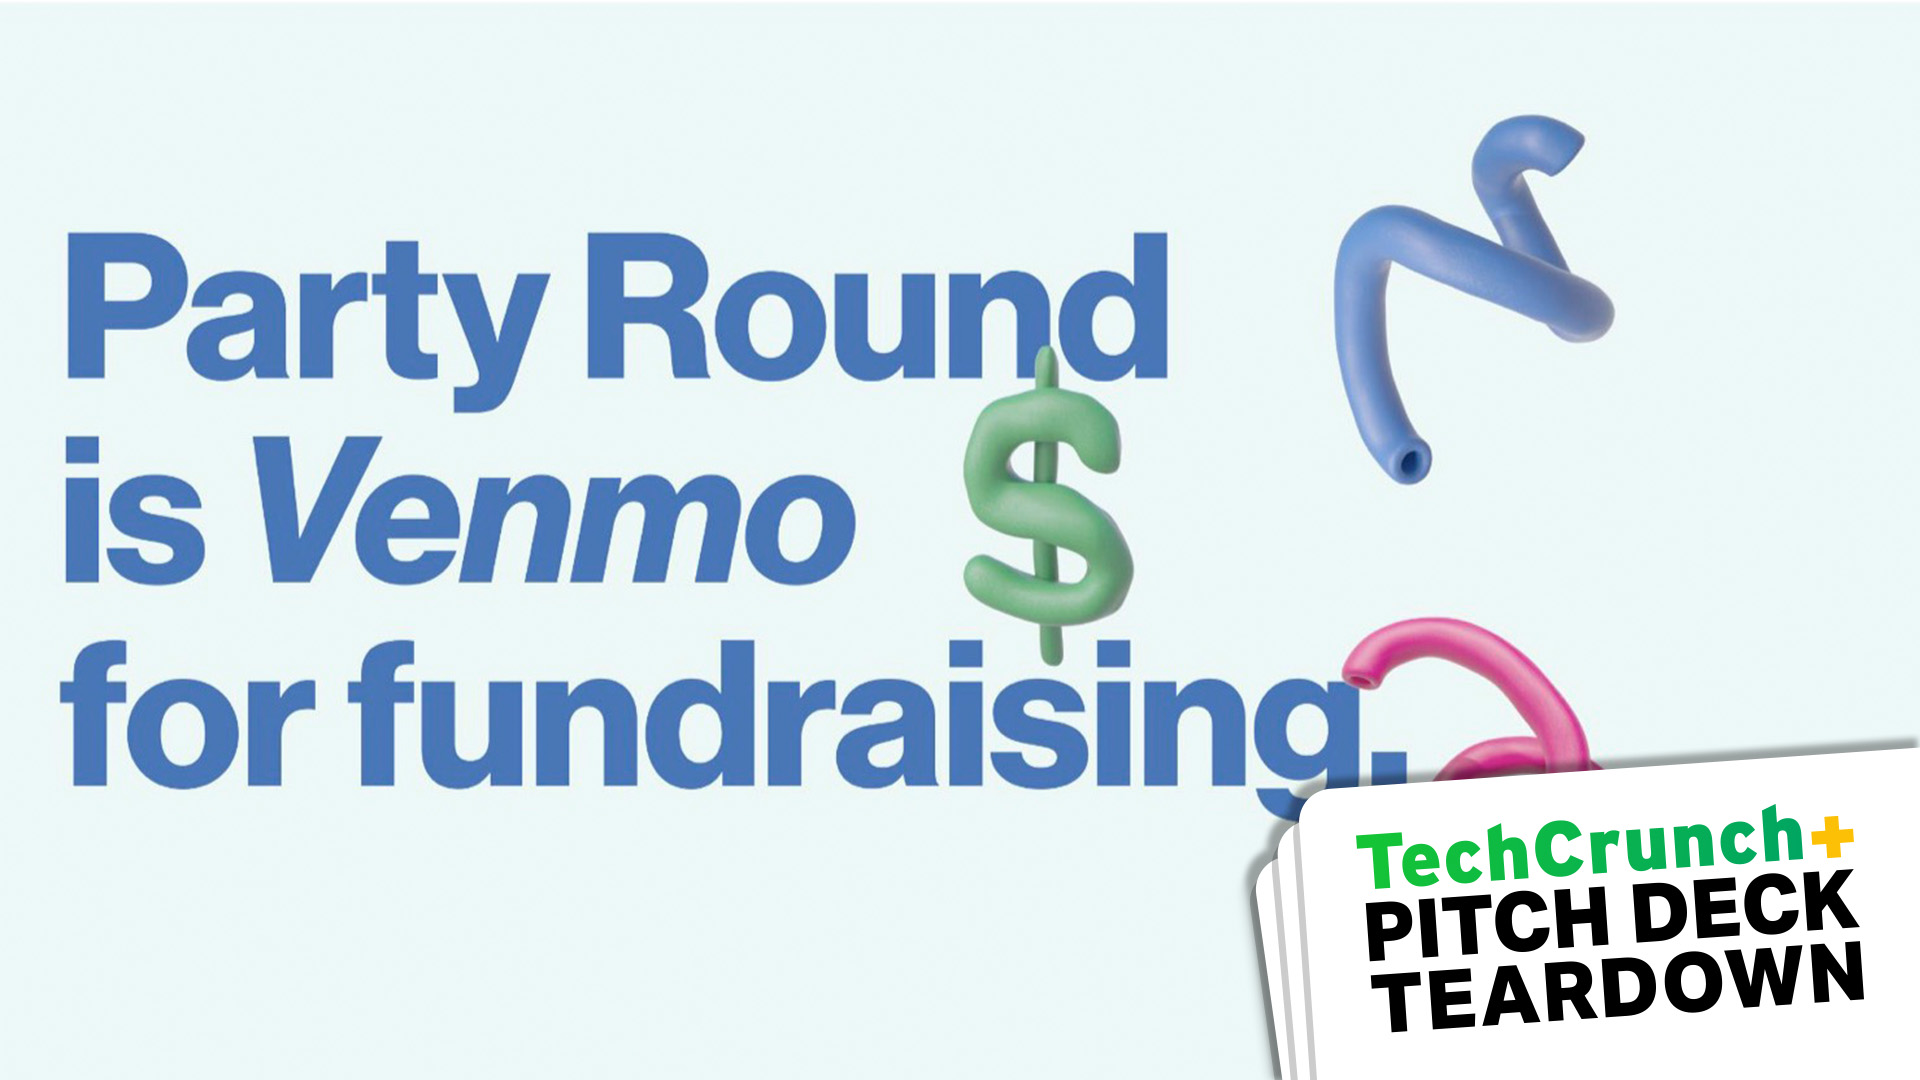 'Party Round is Venmo for Fundraising,' read the cover slide.